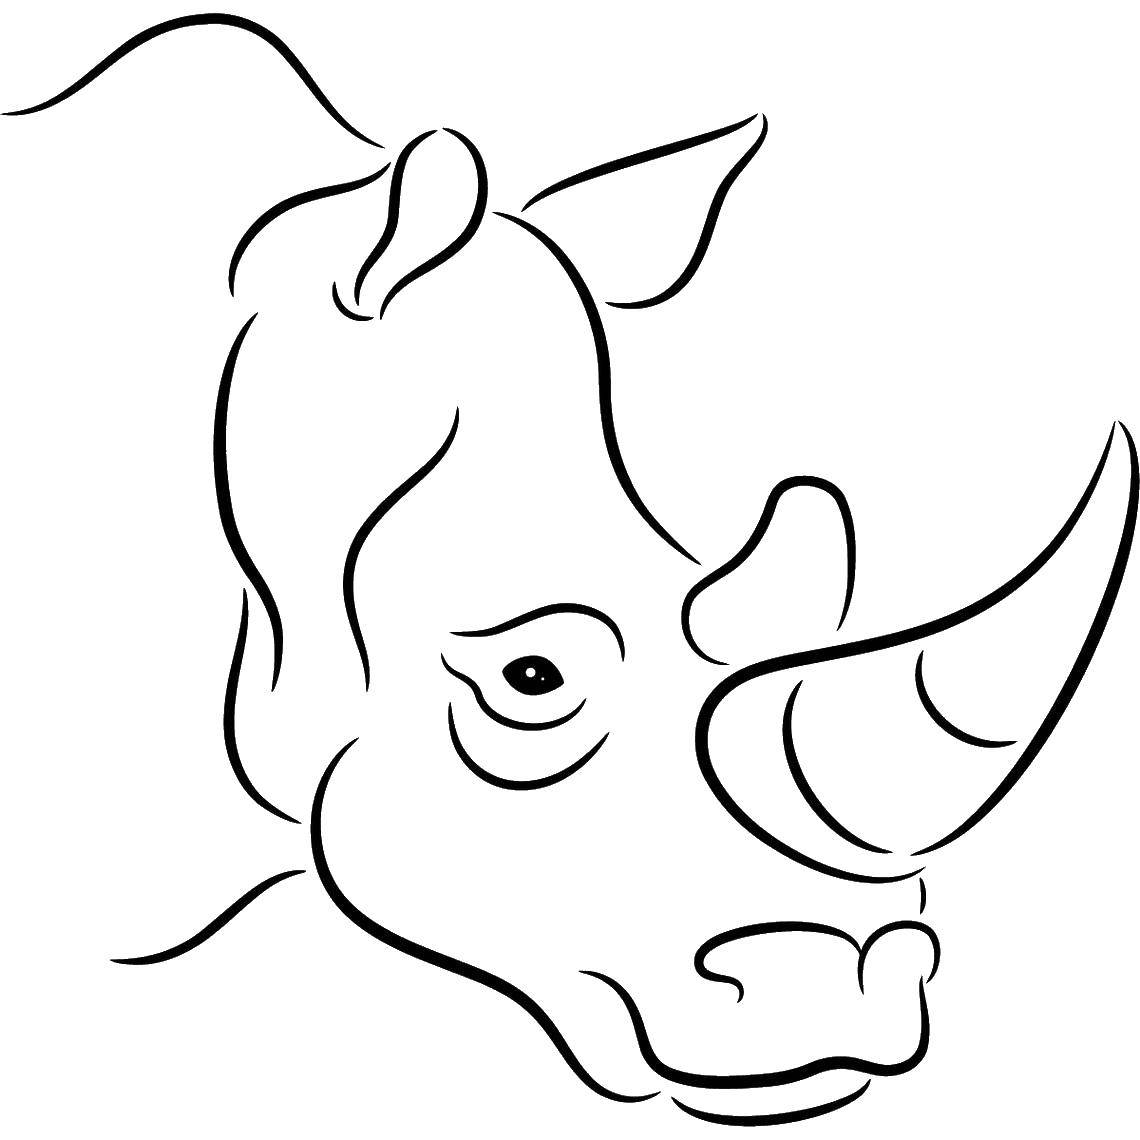 Coloring Rhino. Category Animals. Tags:  Rhino, animals, horn.